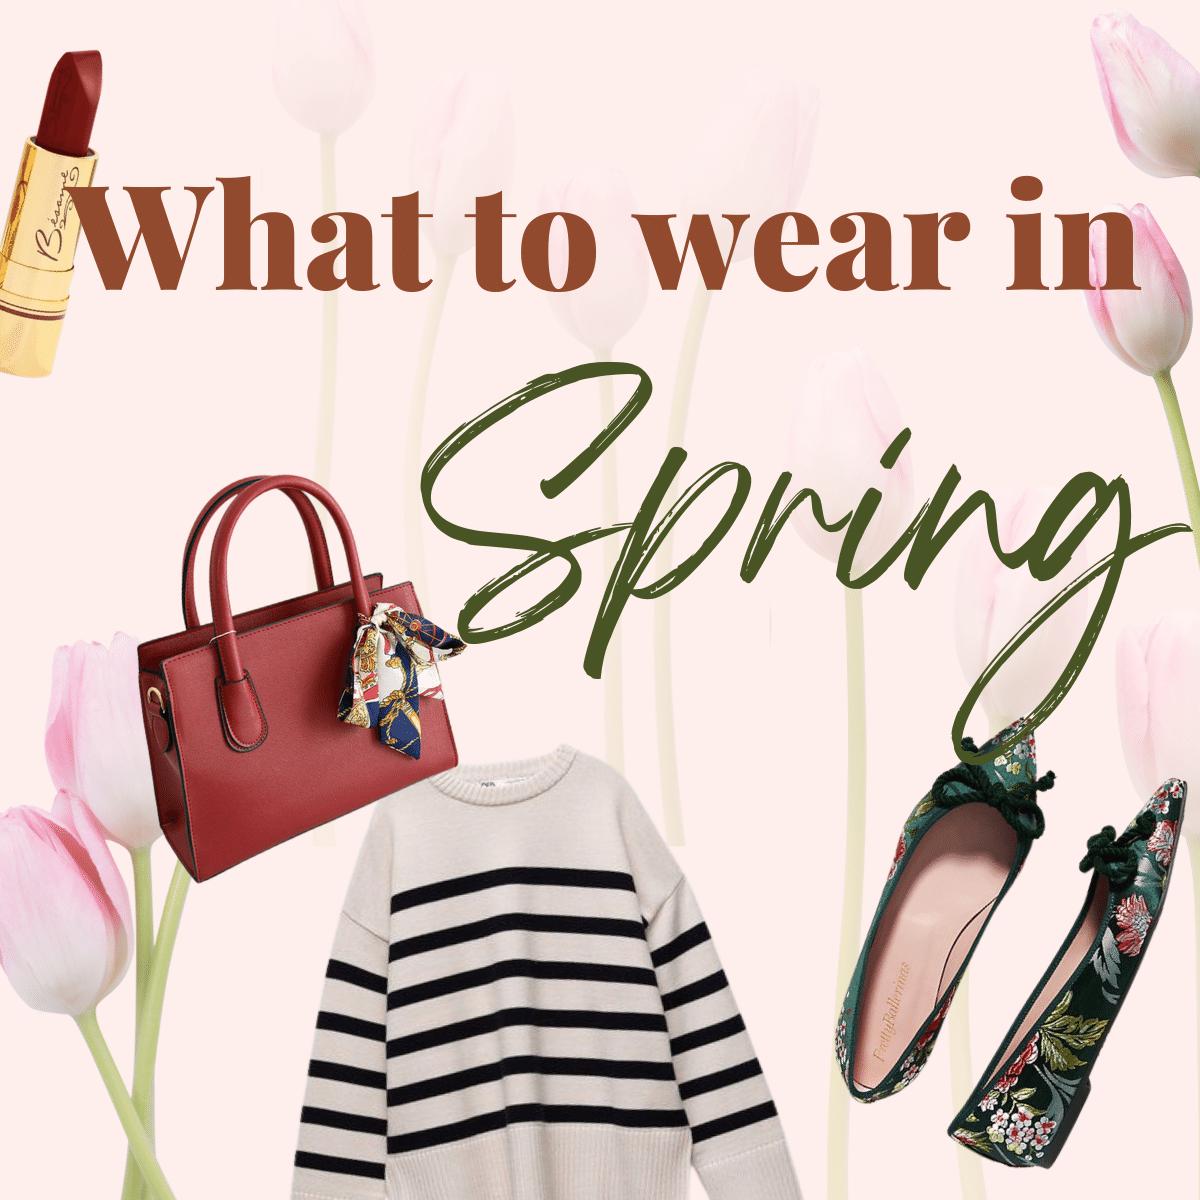 What to wear in spring?